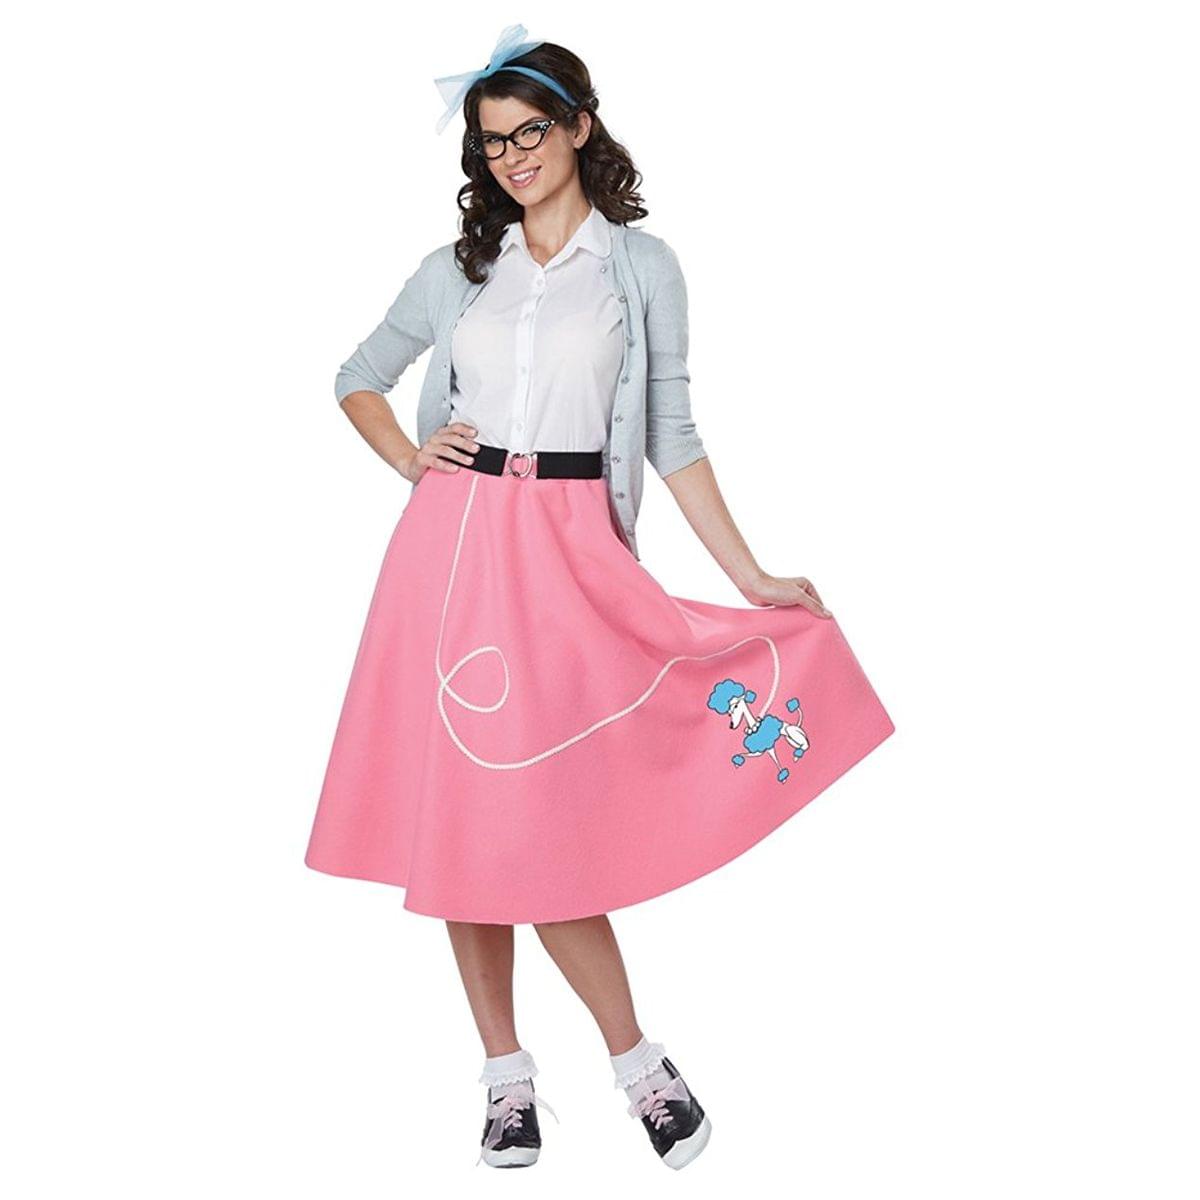 50's Poodle Skirt Adult Costume, Pink